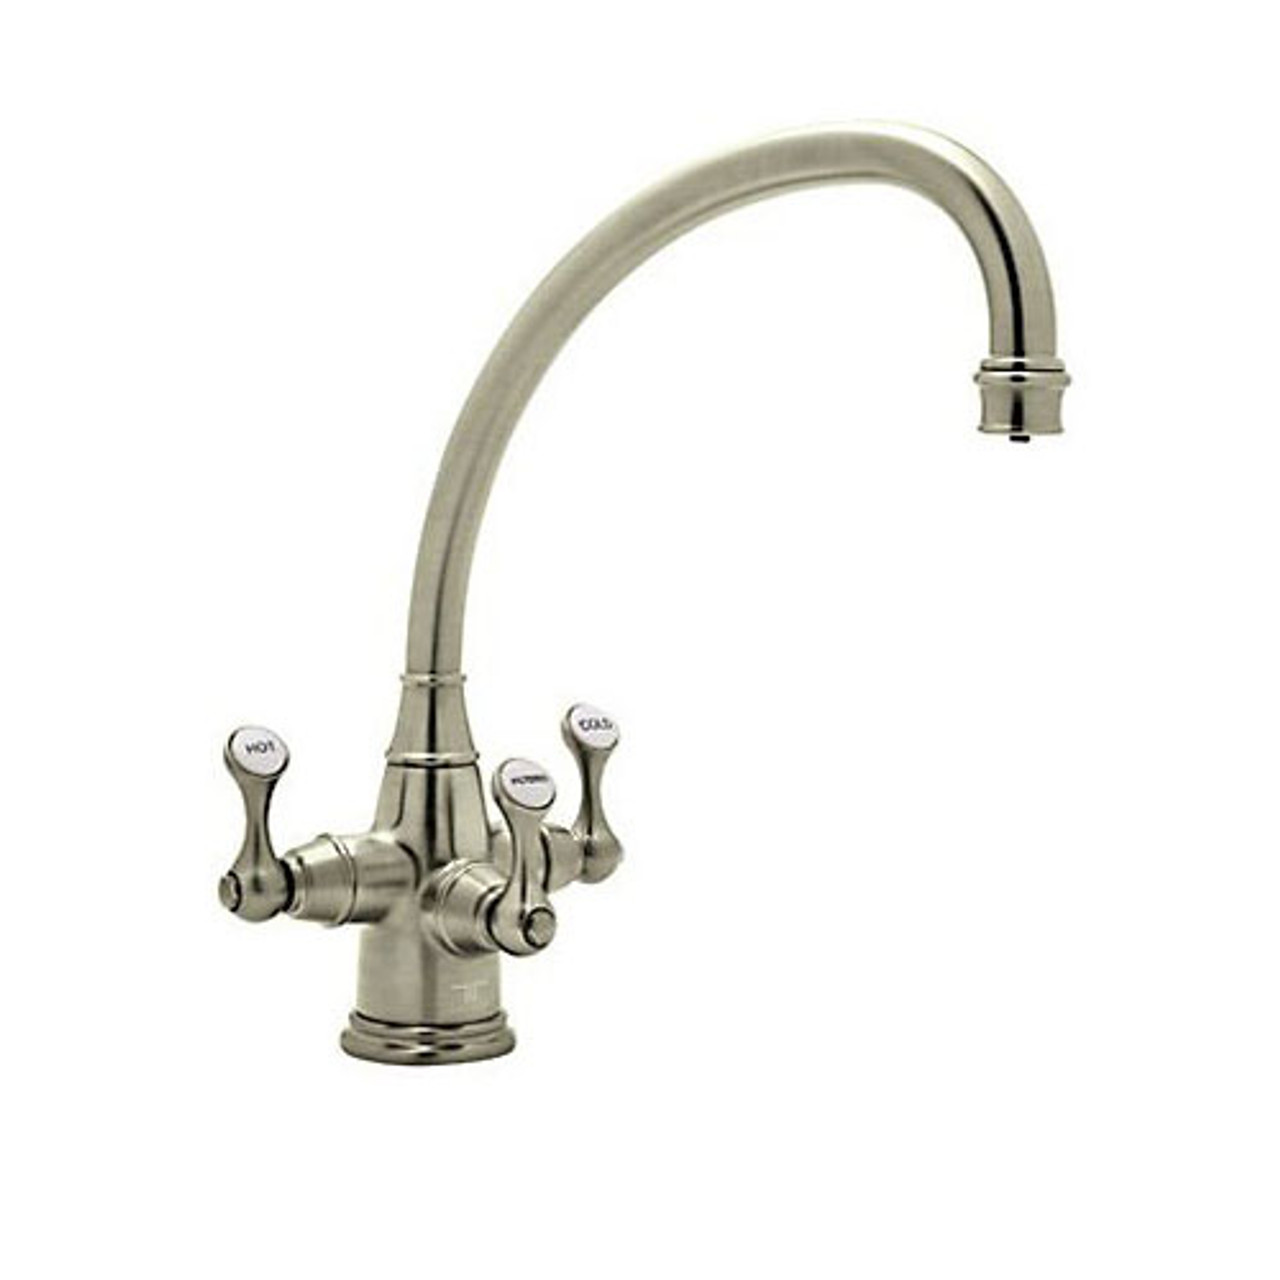 Rohl Perrin and Rowe Triple Handle Filtering Kitchen Faucet in Satin Nickel  U.1420LS-STN-2 Online